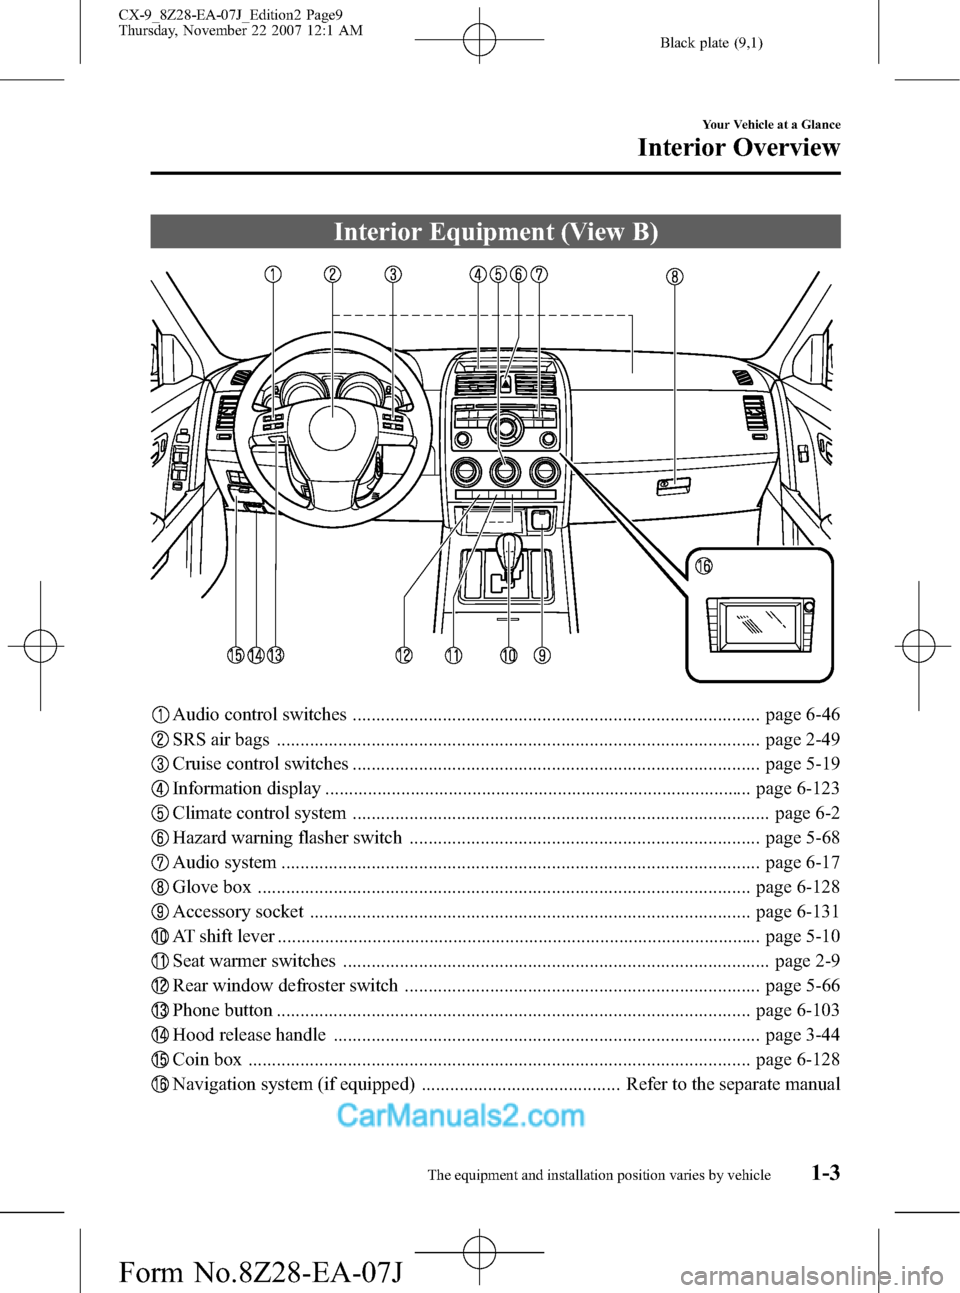 MAZDA MODEL CX-9 2008  Owners Manual (in English) Black plate (9,1)
Interior Equipment (View B)
Audio control switches ...................................................................................... page 6-46
SRS air bags .....................